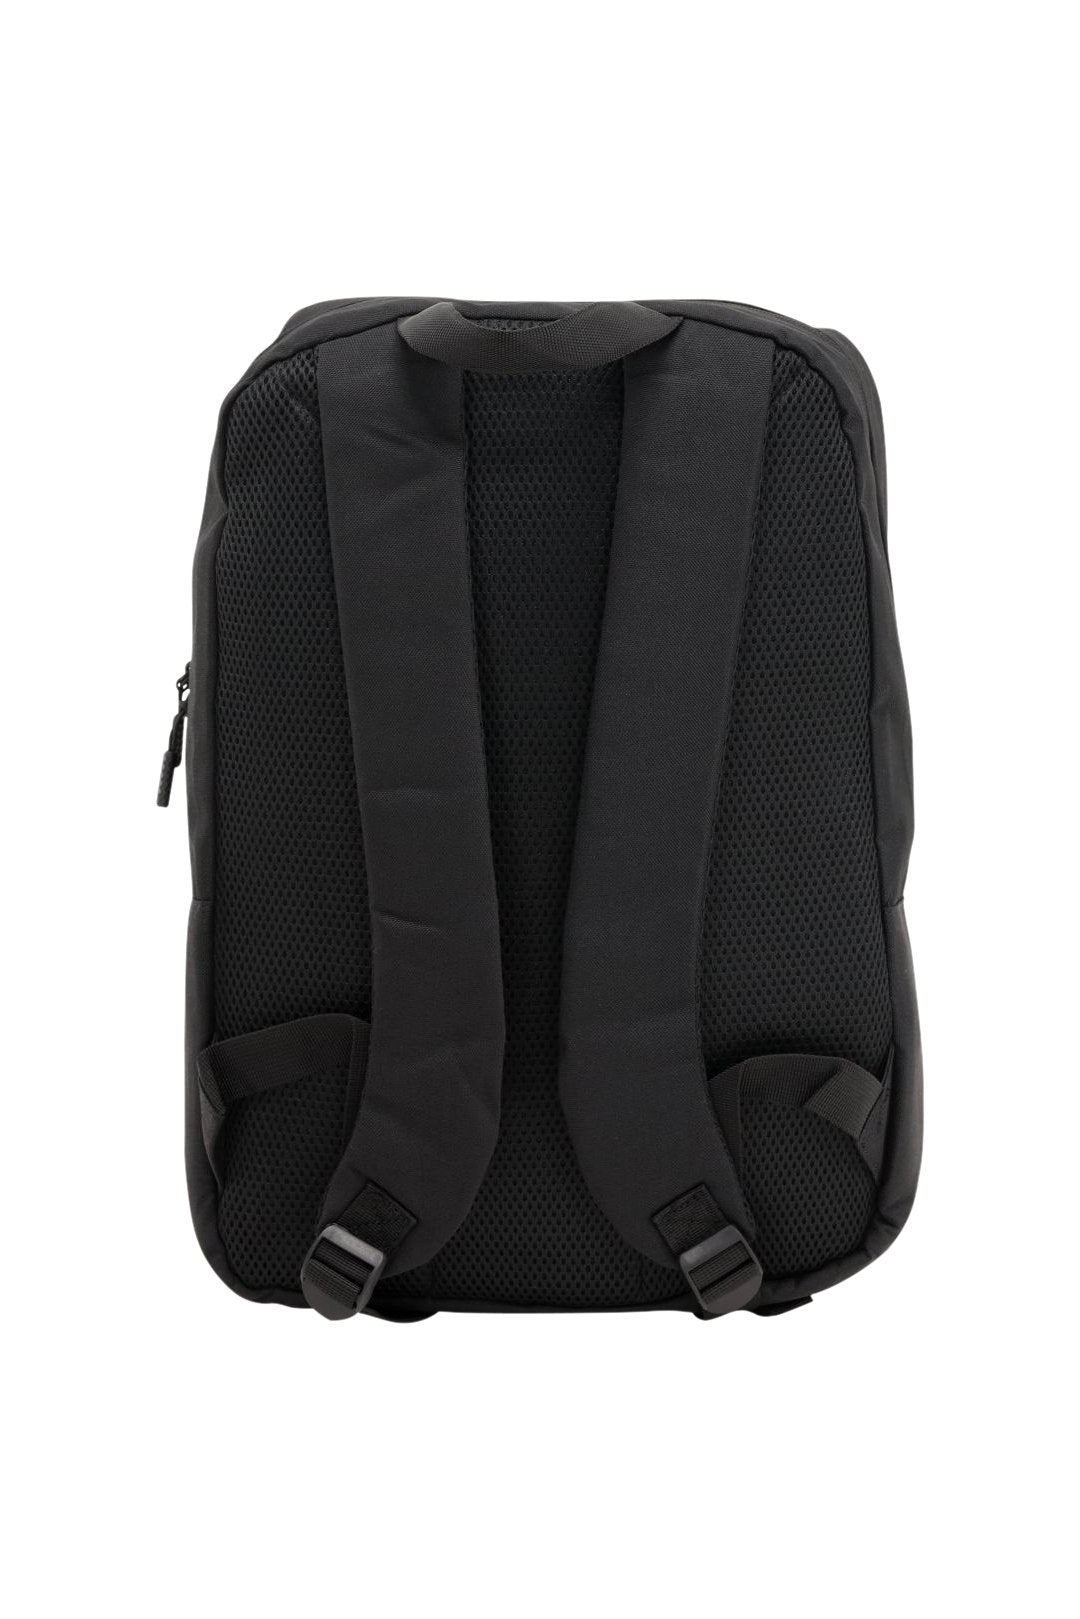 Durable Simple Design Laptop Bag - DS Traders